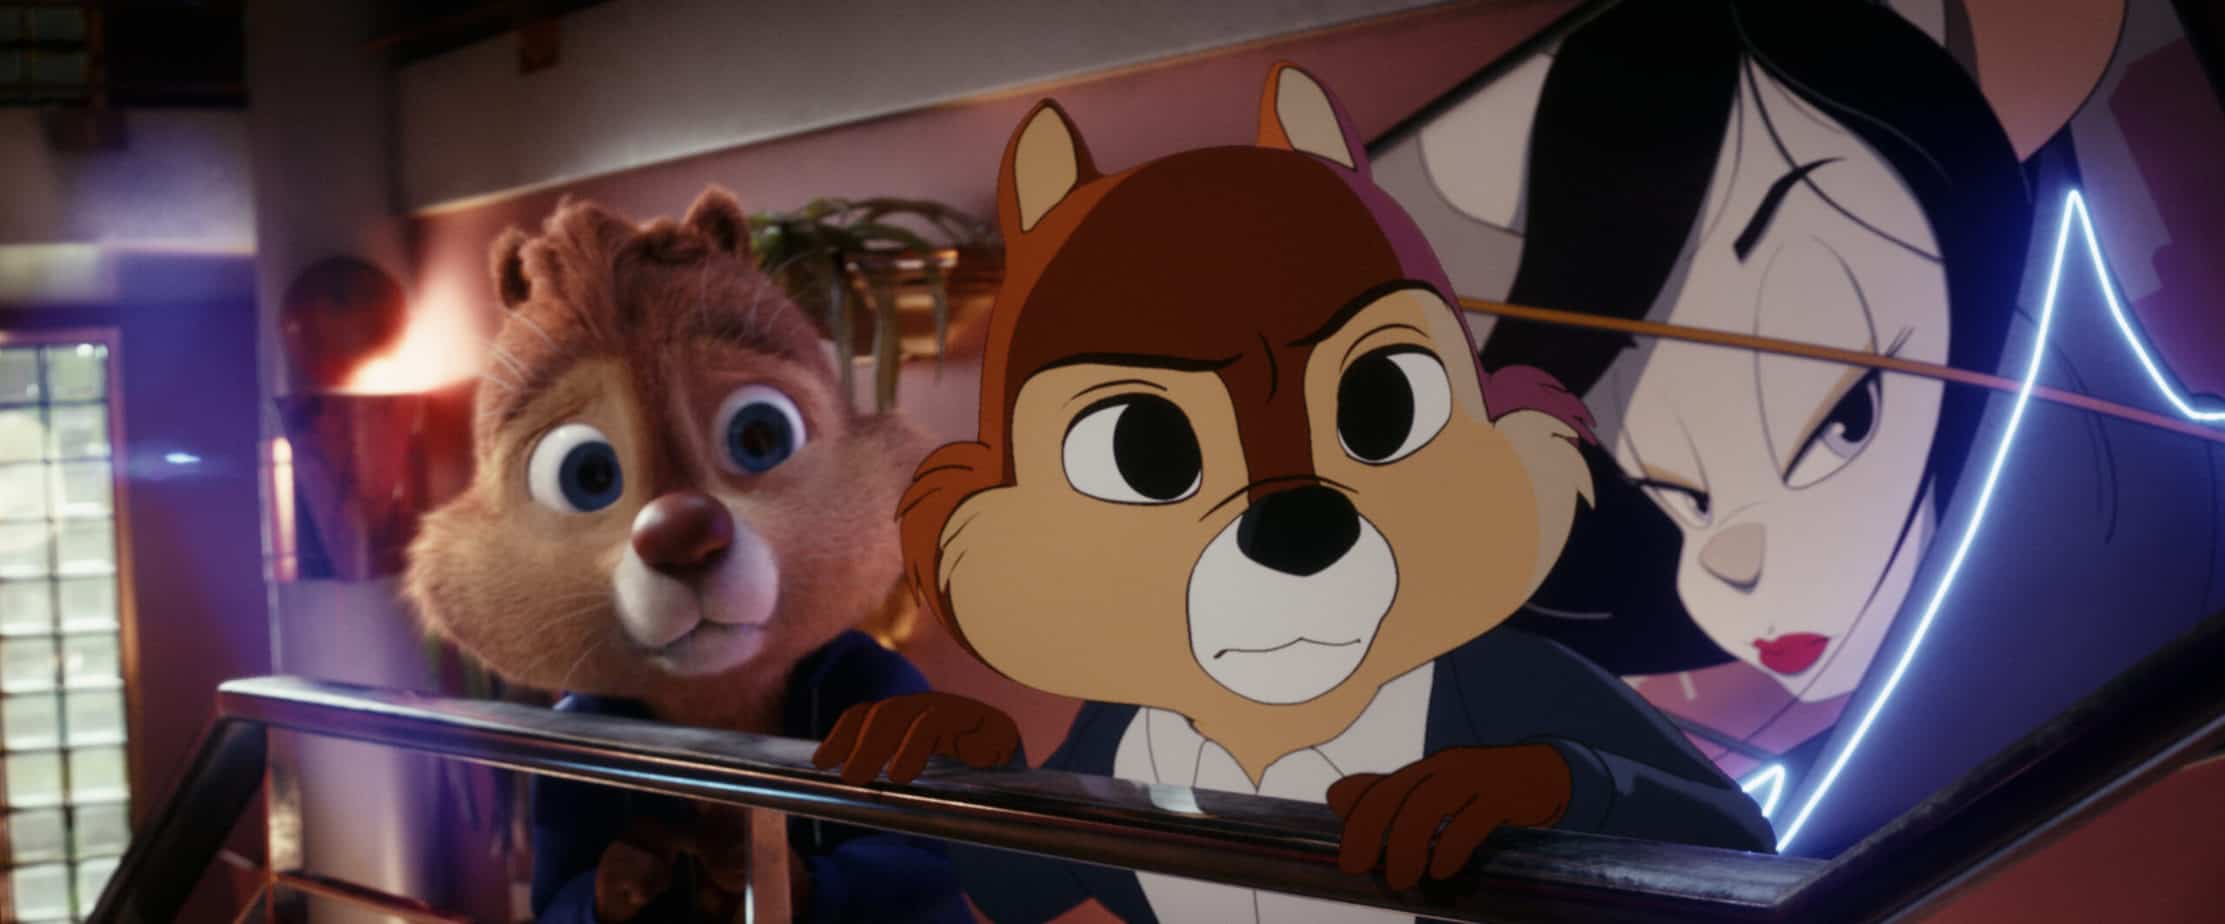 movie quotes from CHIP 'N DALE: RESCUE RANGERS movie